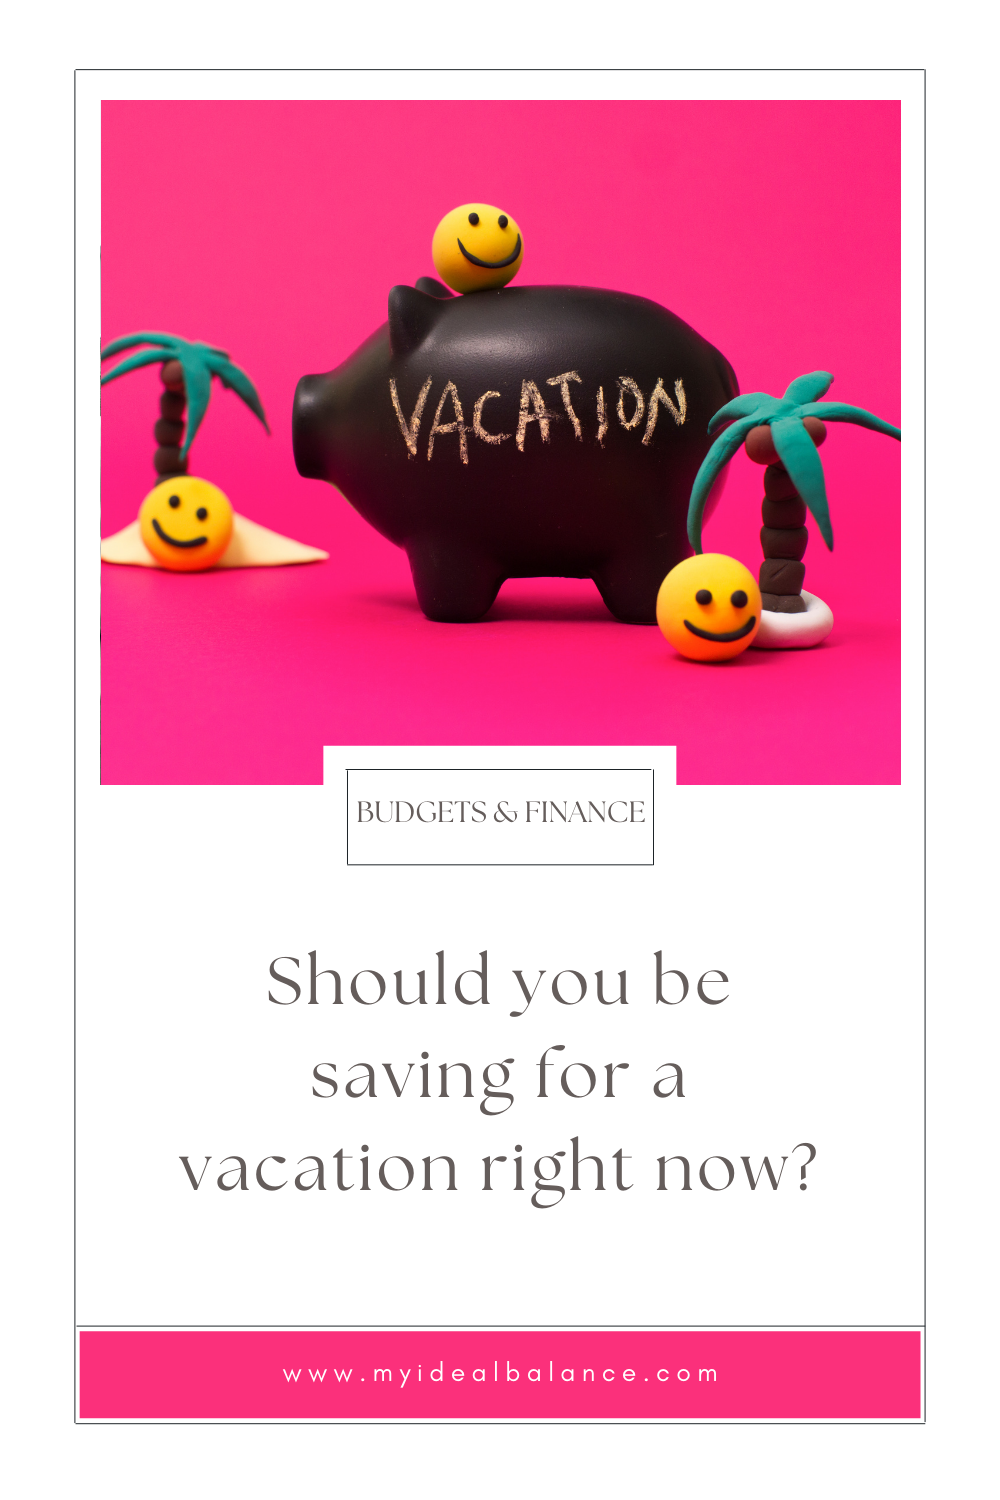 Should you be saving for a vacation right now?